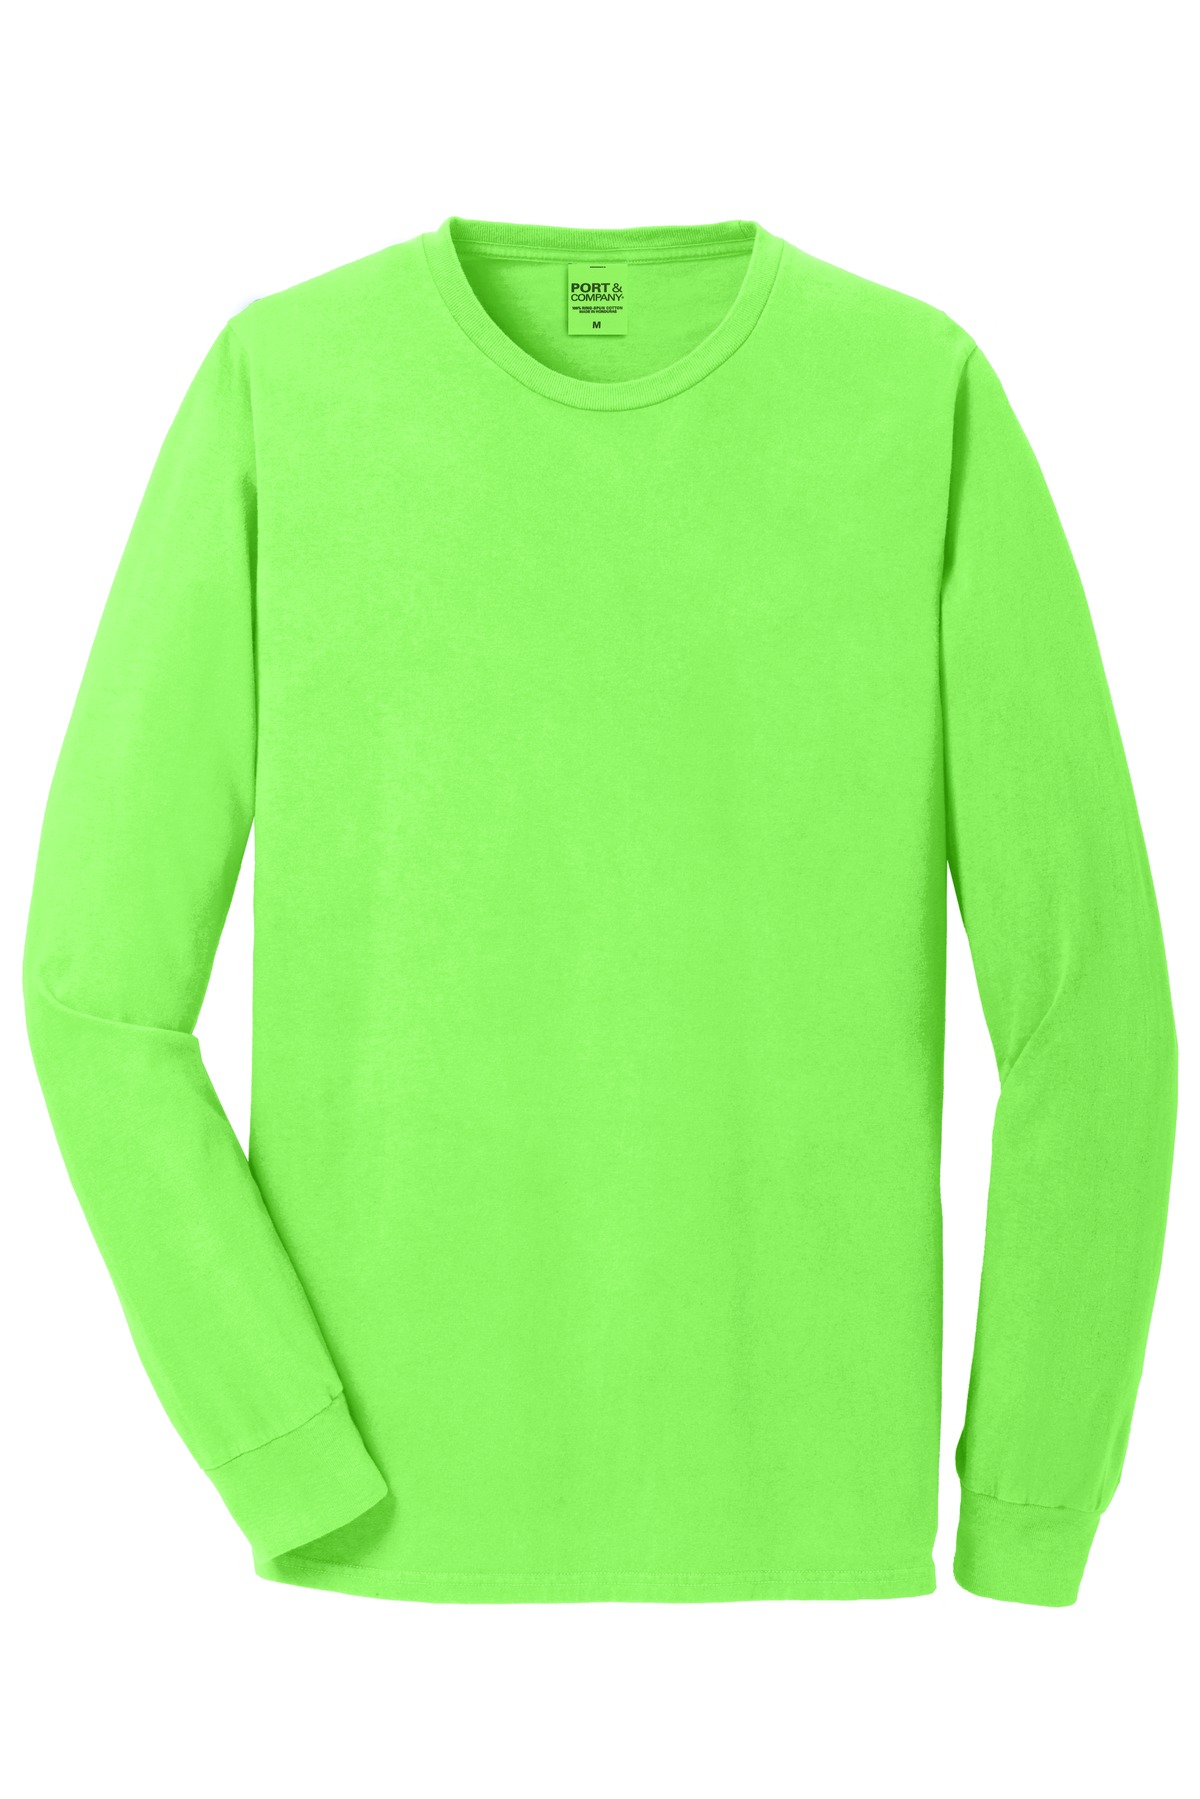 Port & Company Pigment Dyed Long Sleeve Tee-XL (Neon Green) - image 5 of 6